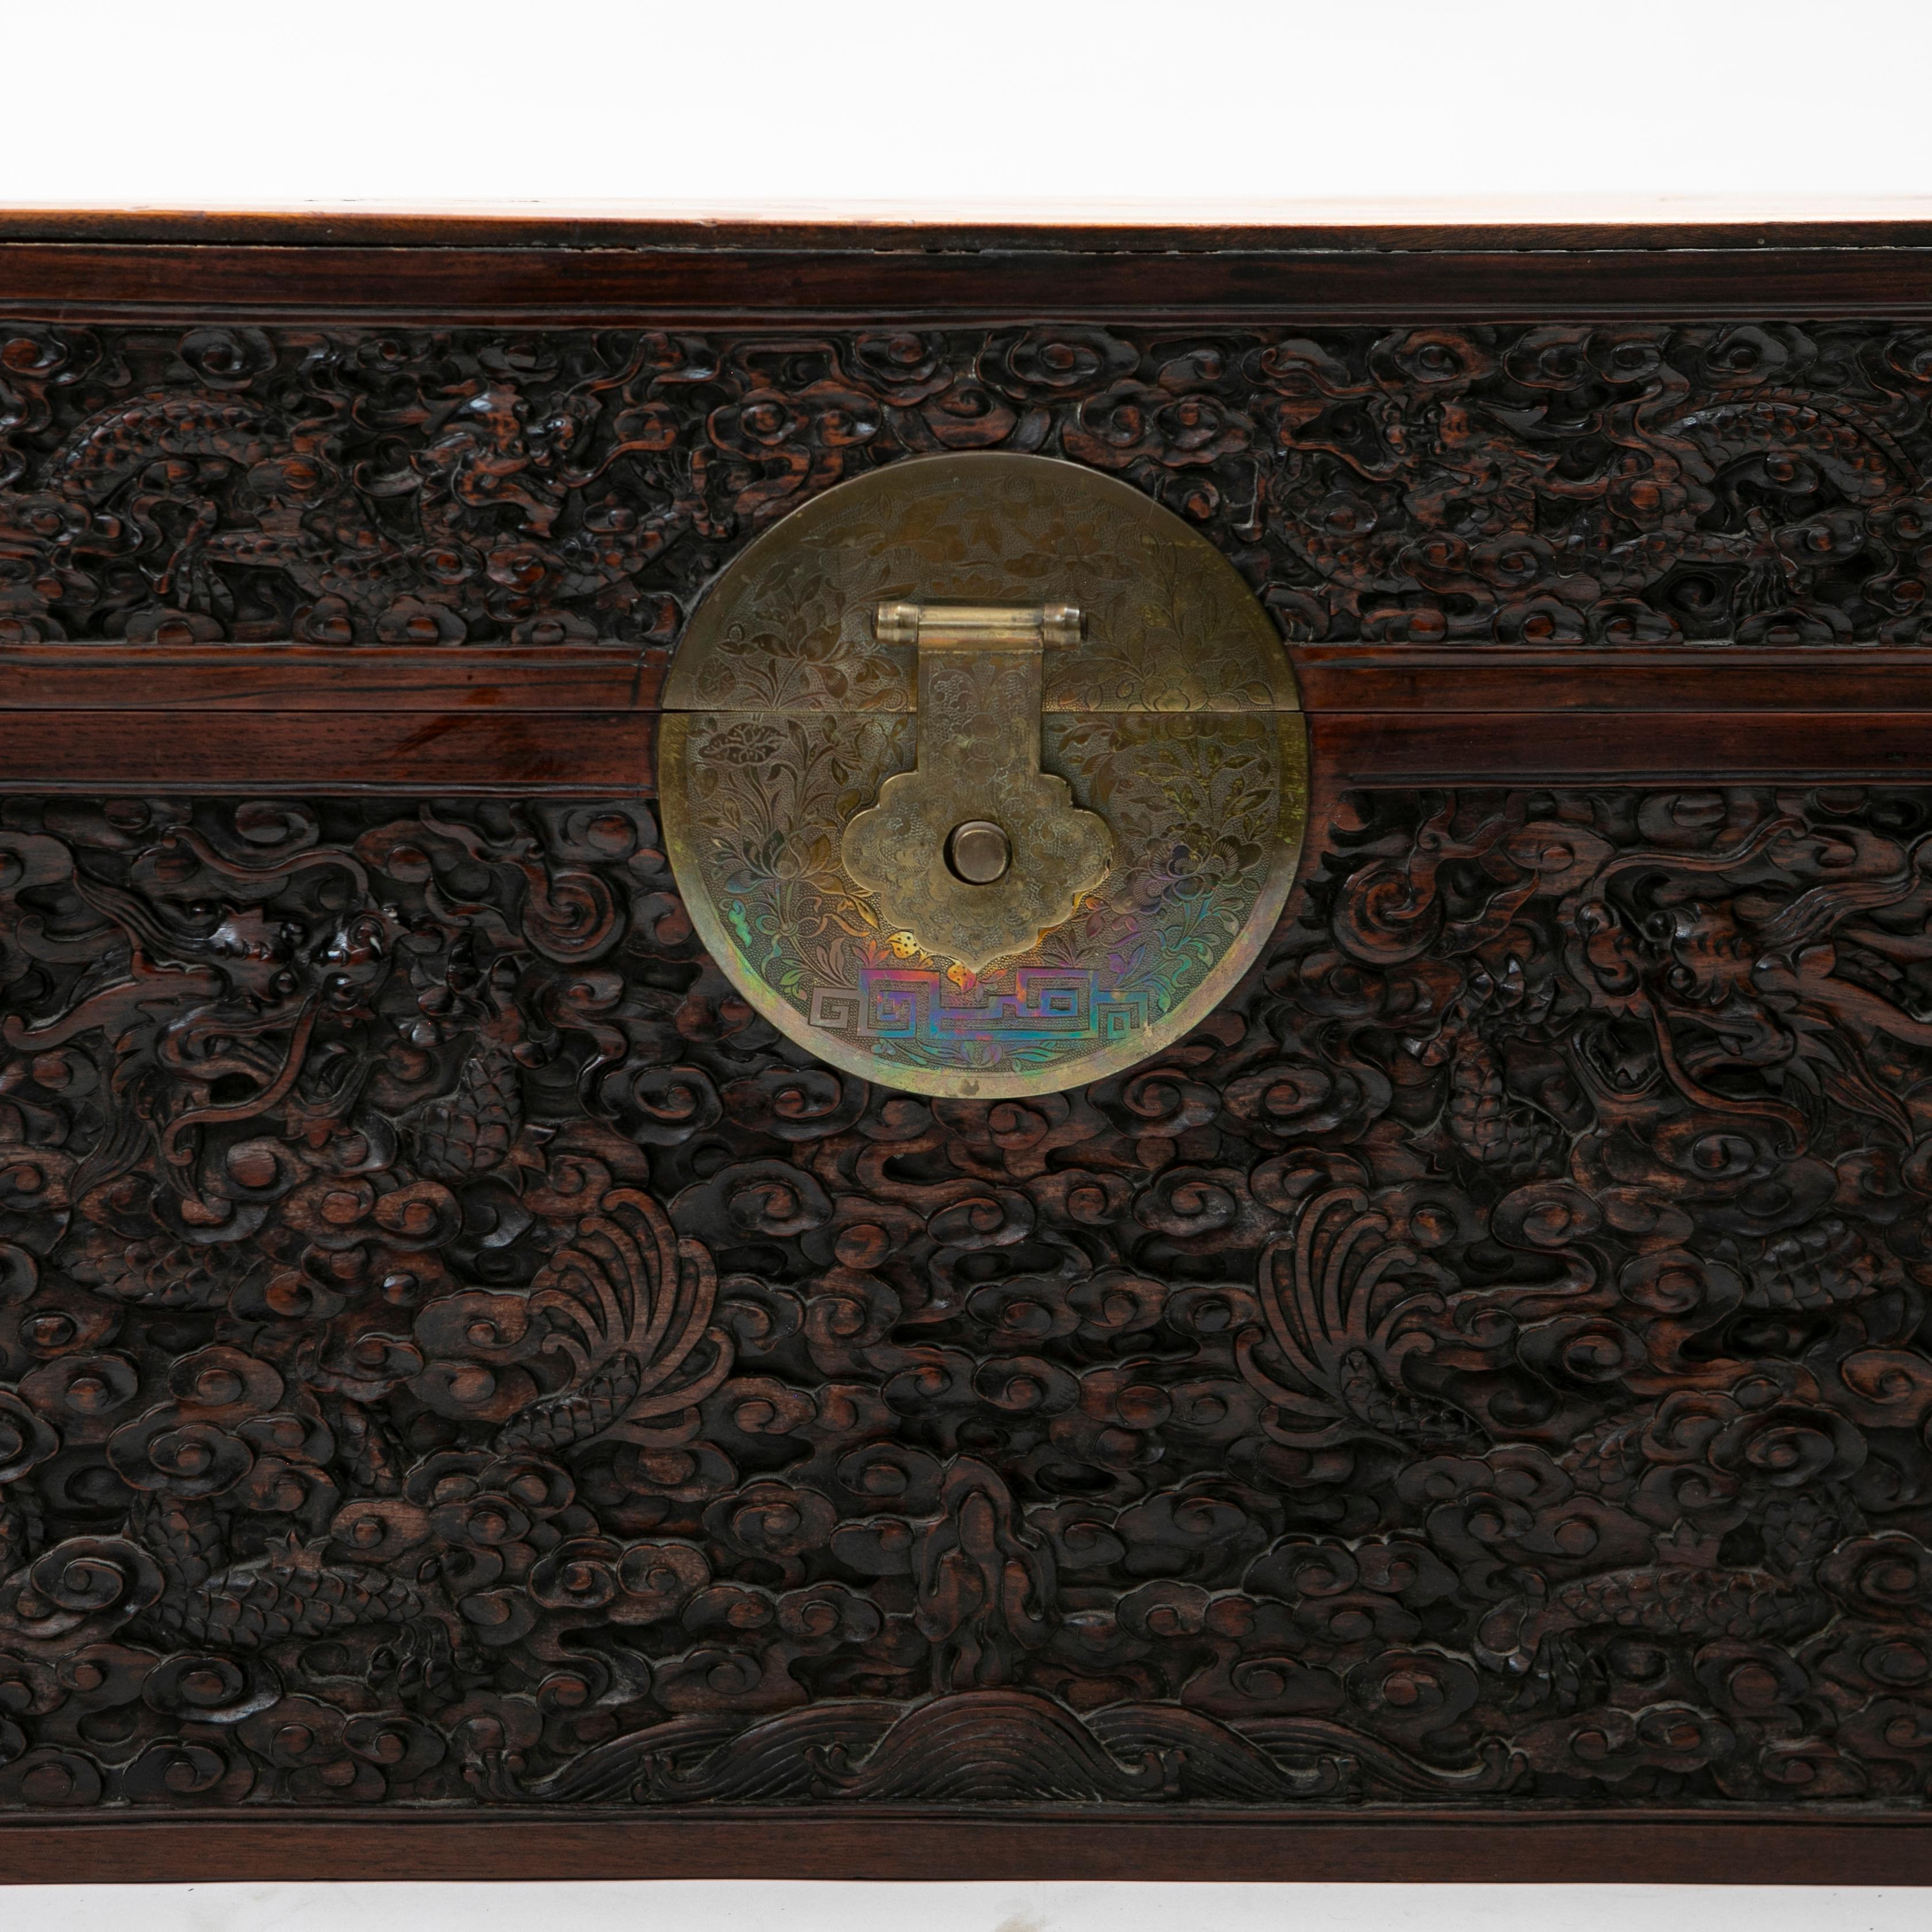 An antique carved Chinese camphor and blackwood chest.
Blackwood front carved in relief with dragons in the sky / clouds.
Fitted with original brass medalion, richly chiseled in the form of flowers and foliage.

Untouched original